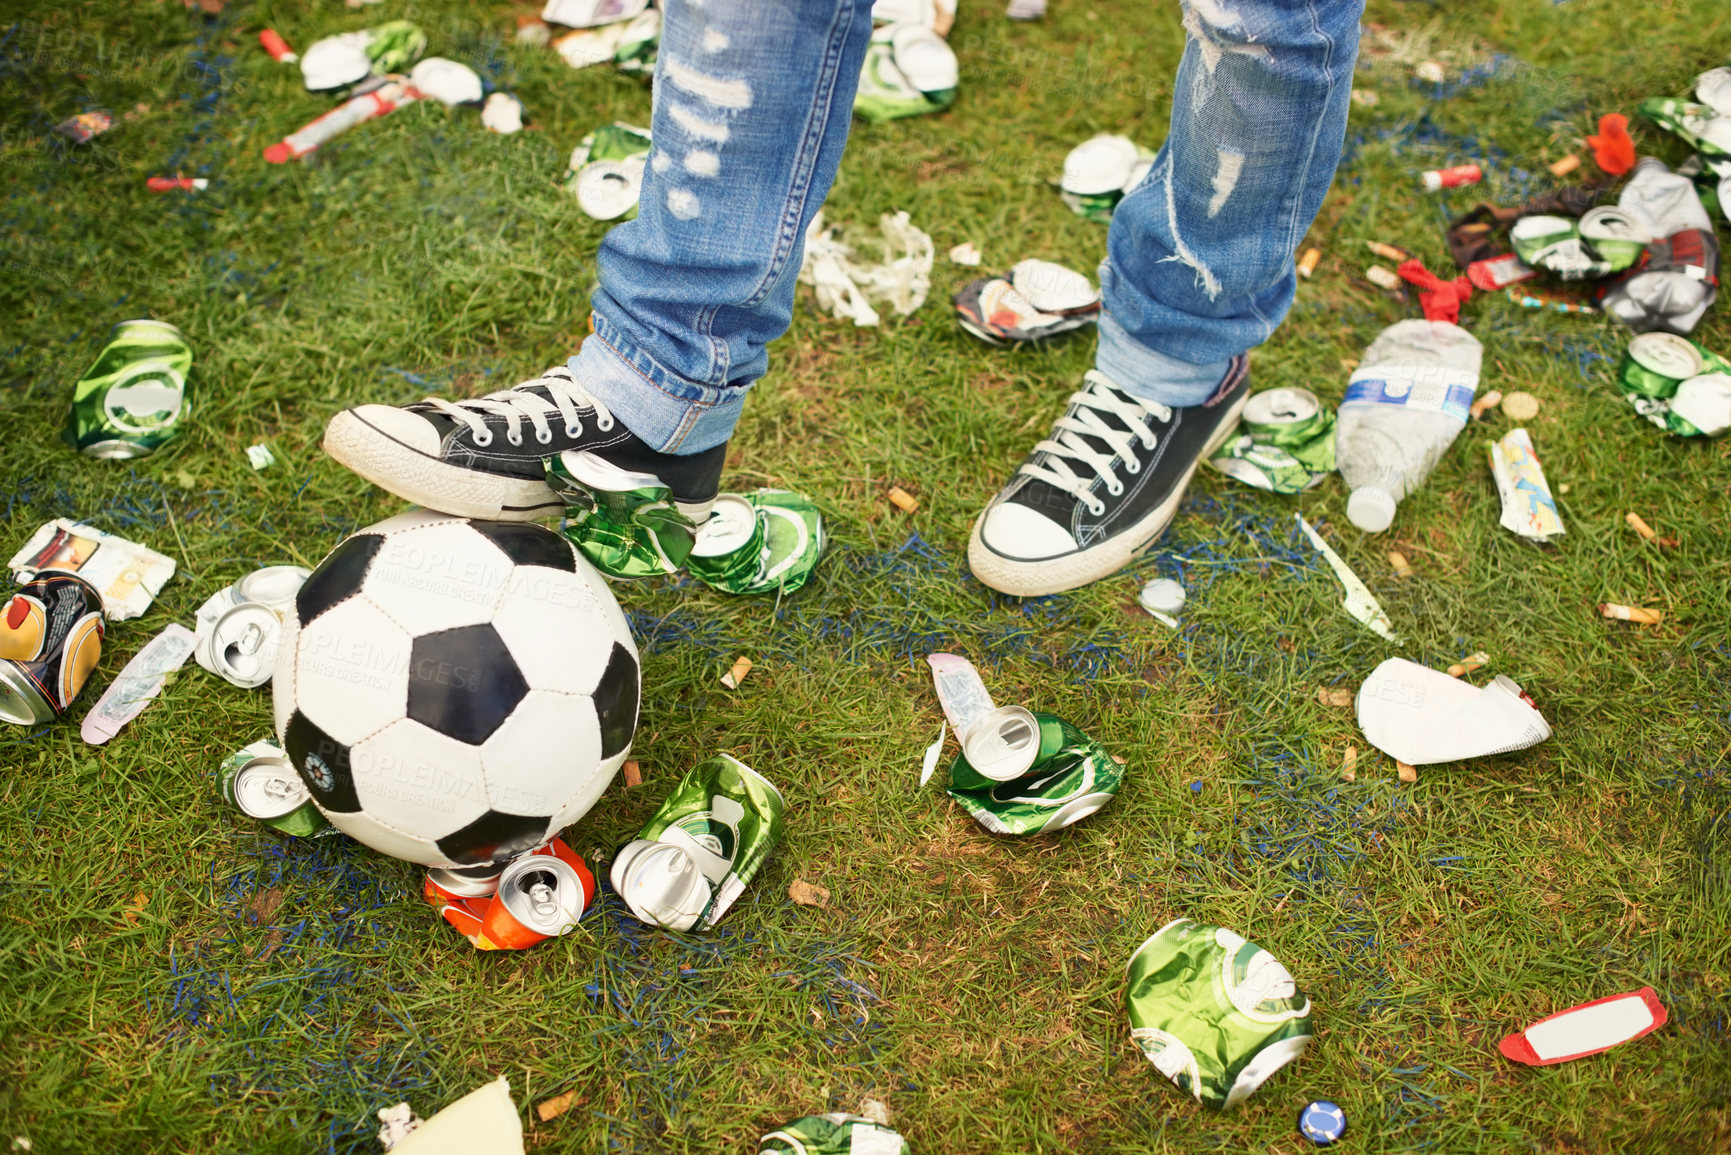 Buy stock photo A person playing with a football amidst the trash left behind at a music festival